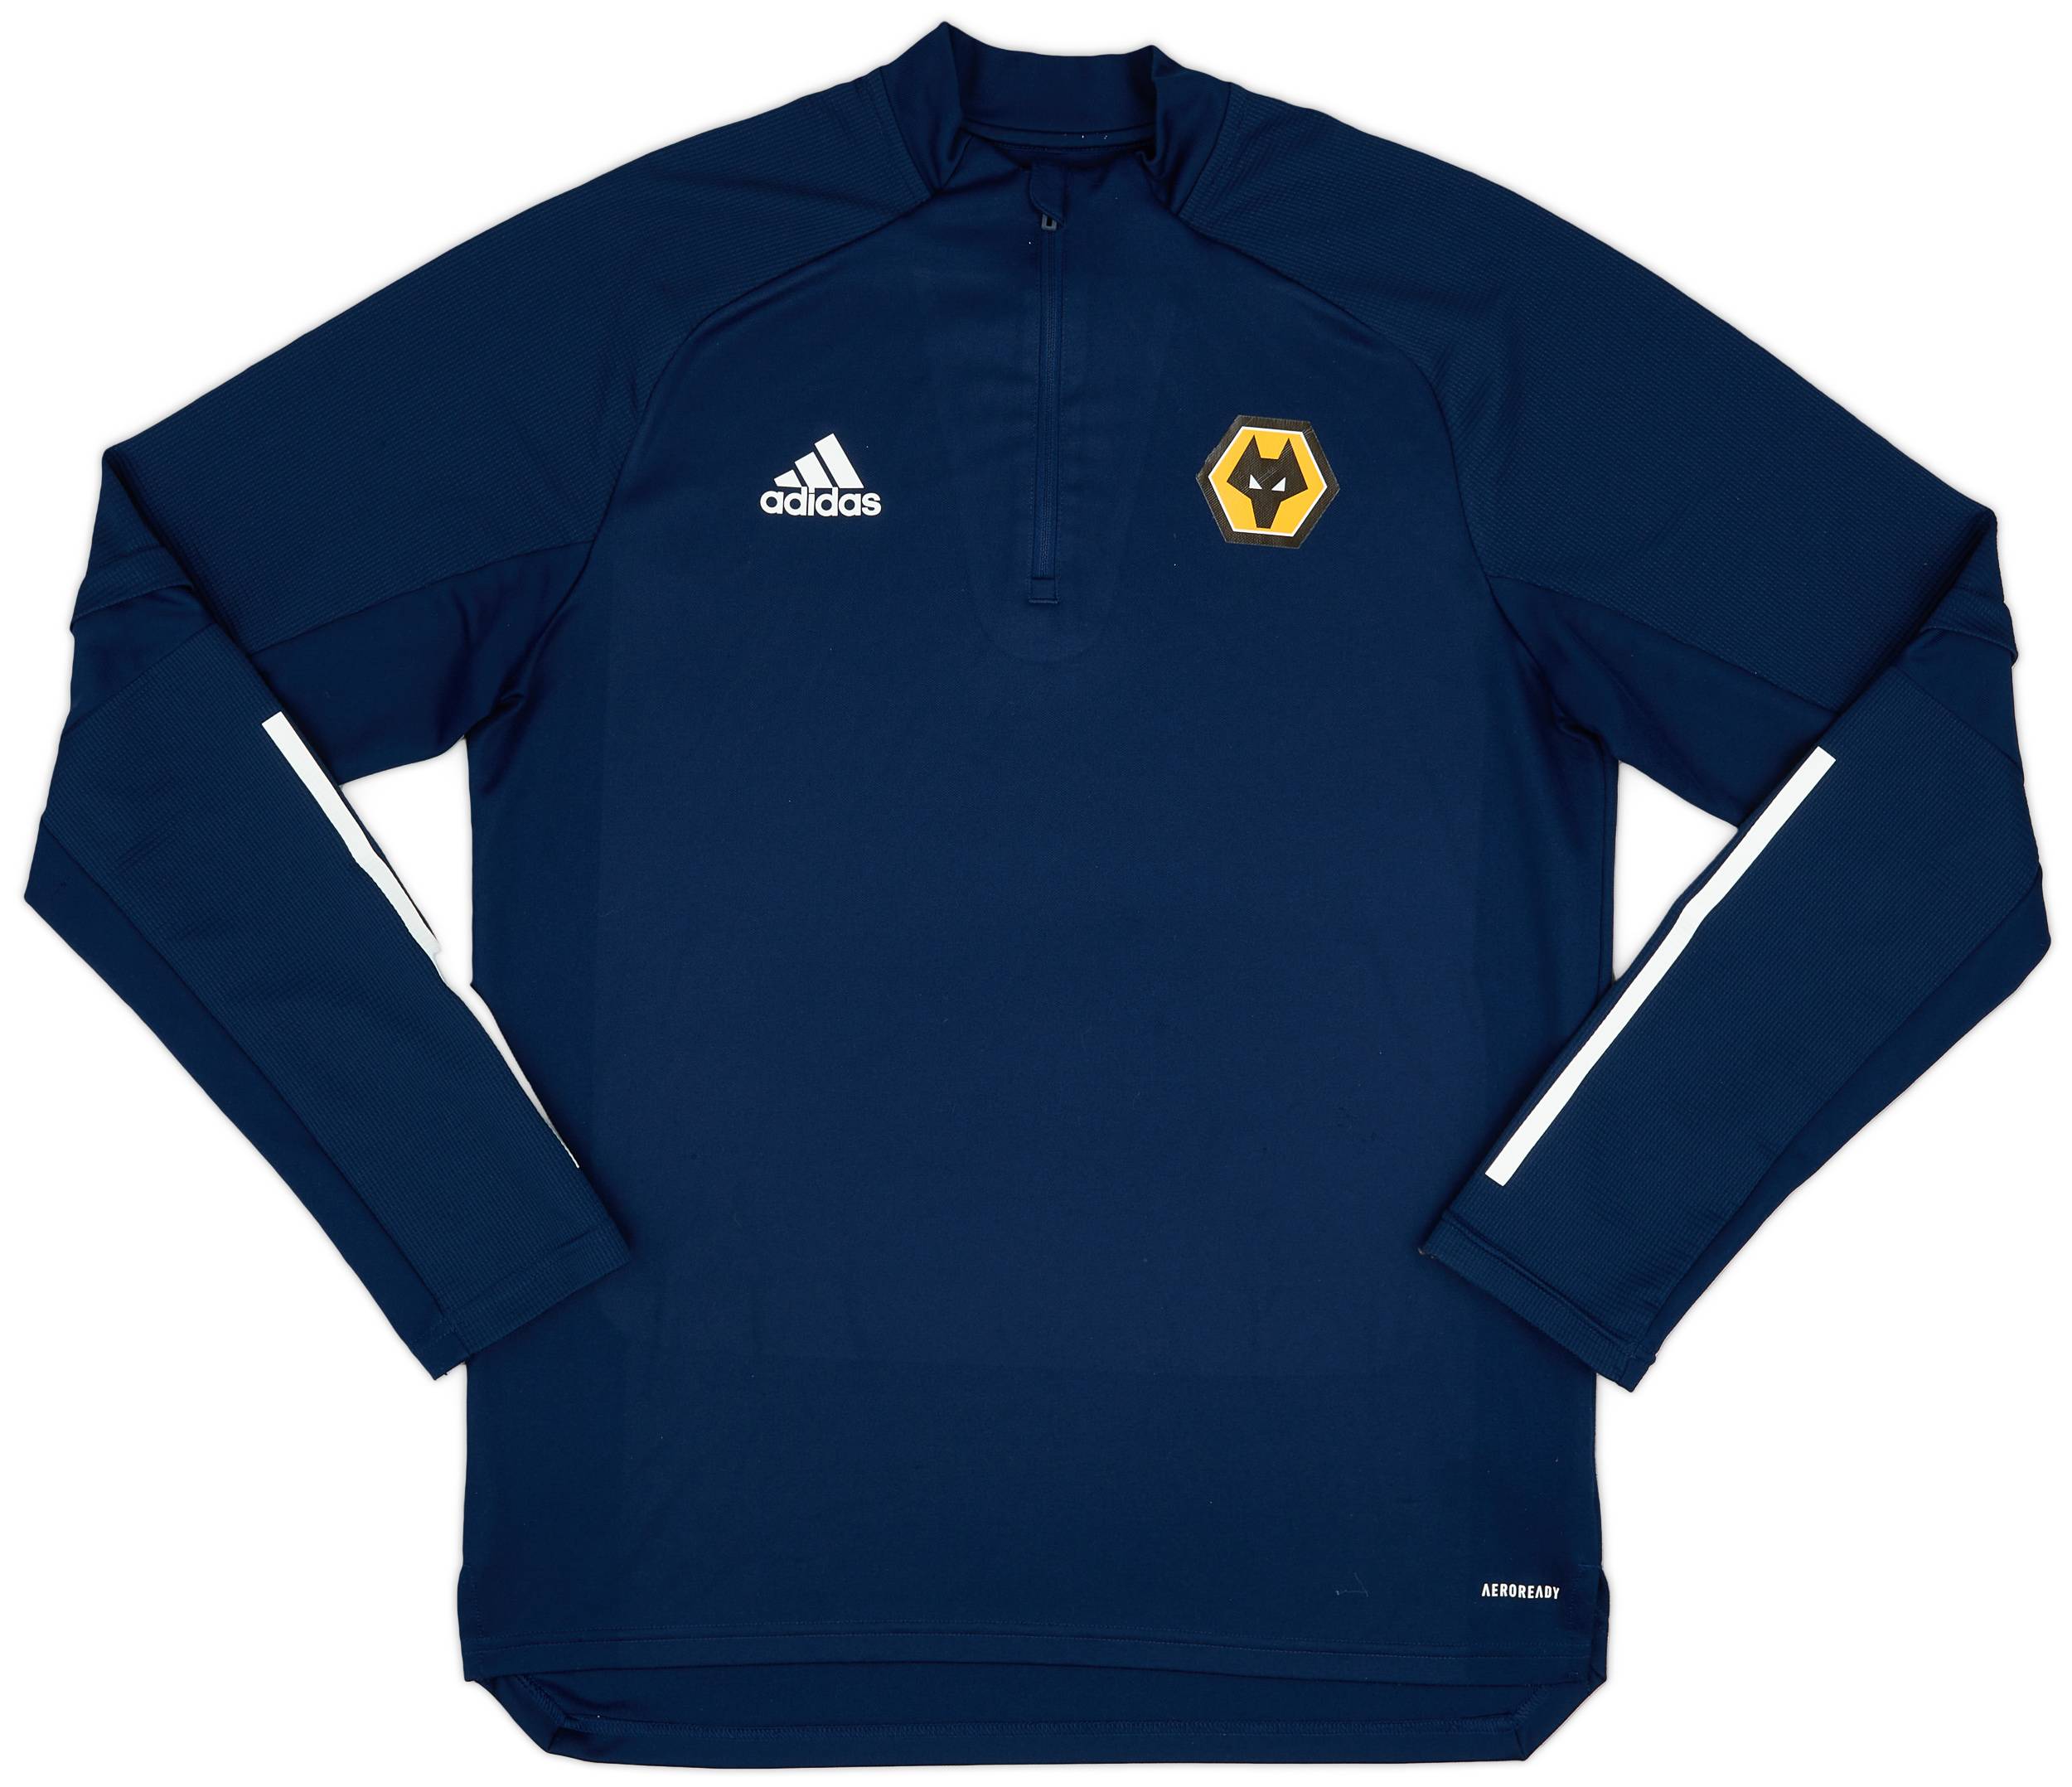 2020-21 Wolves adidas 1/4 Zip Training Top - 8/10 - (L)